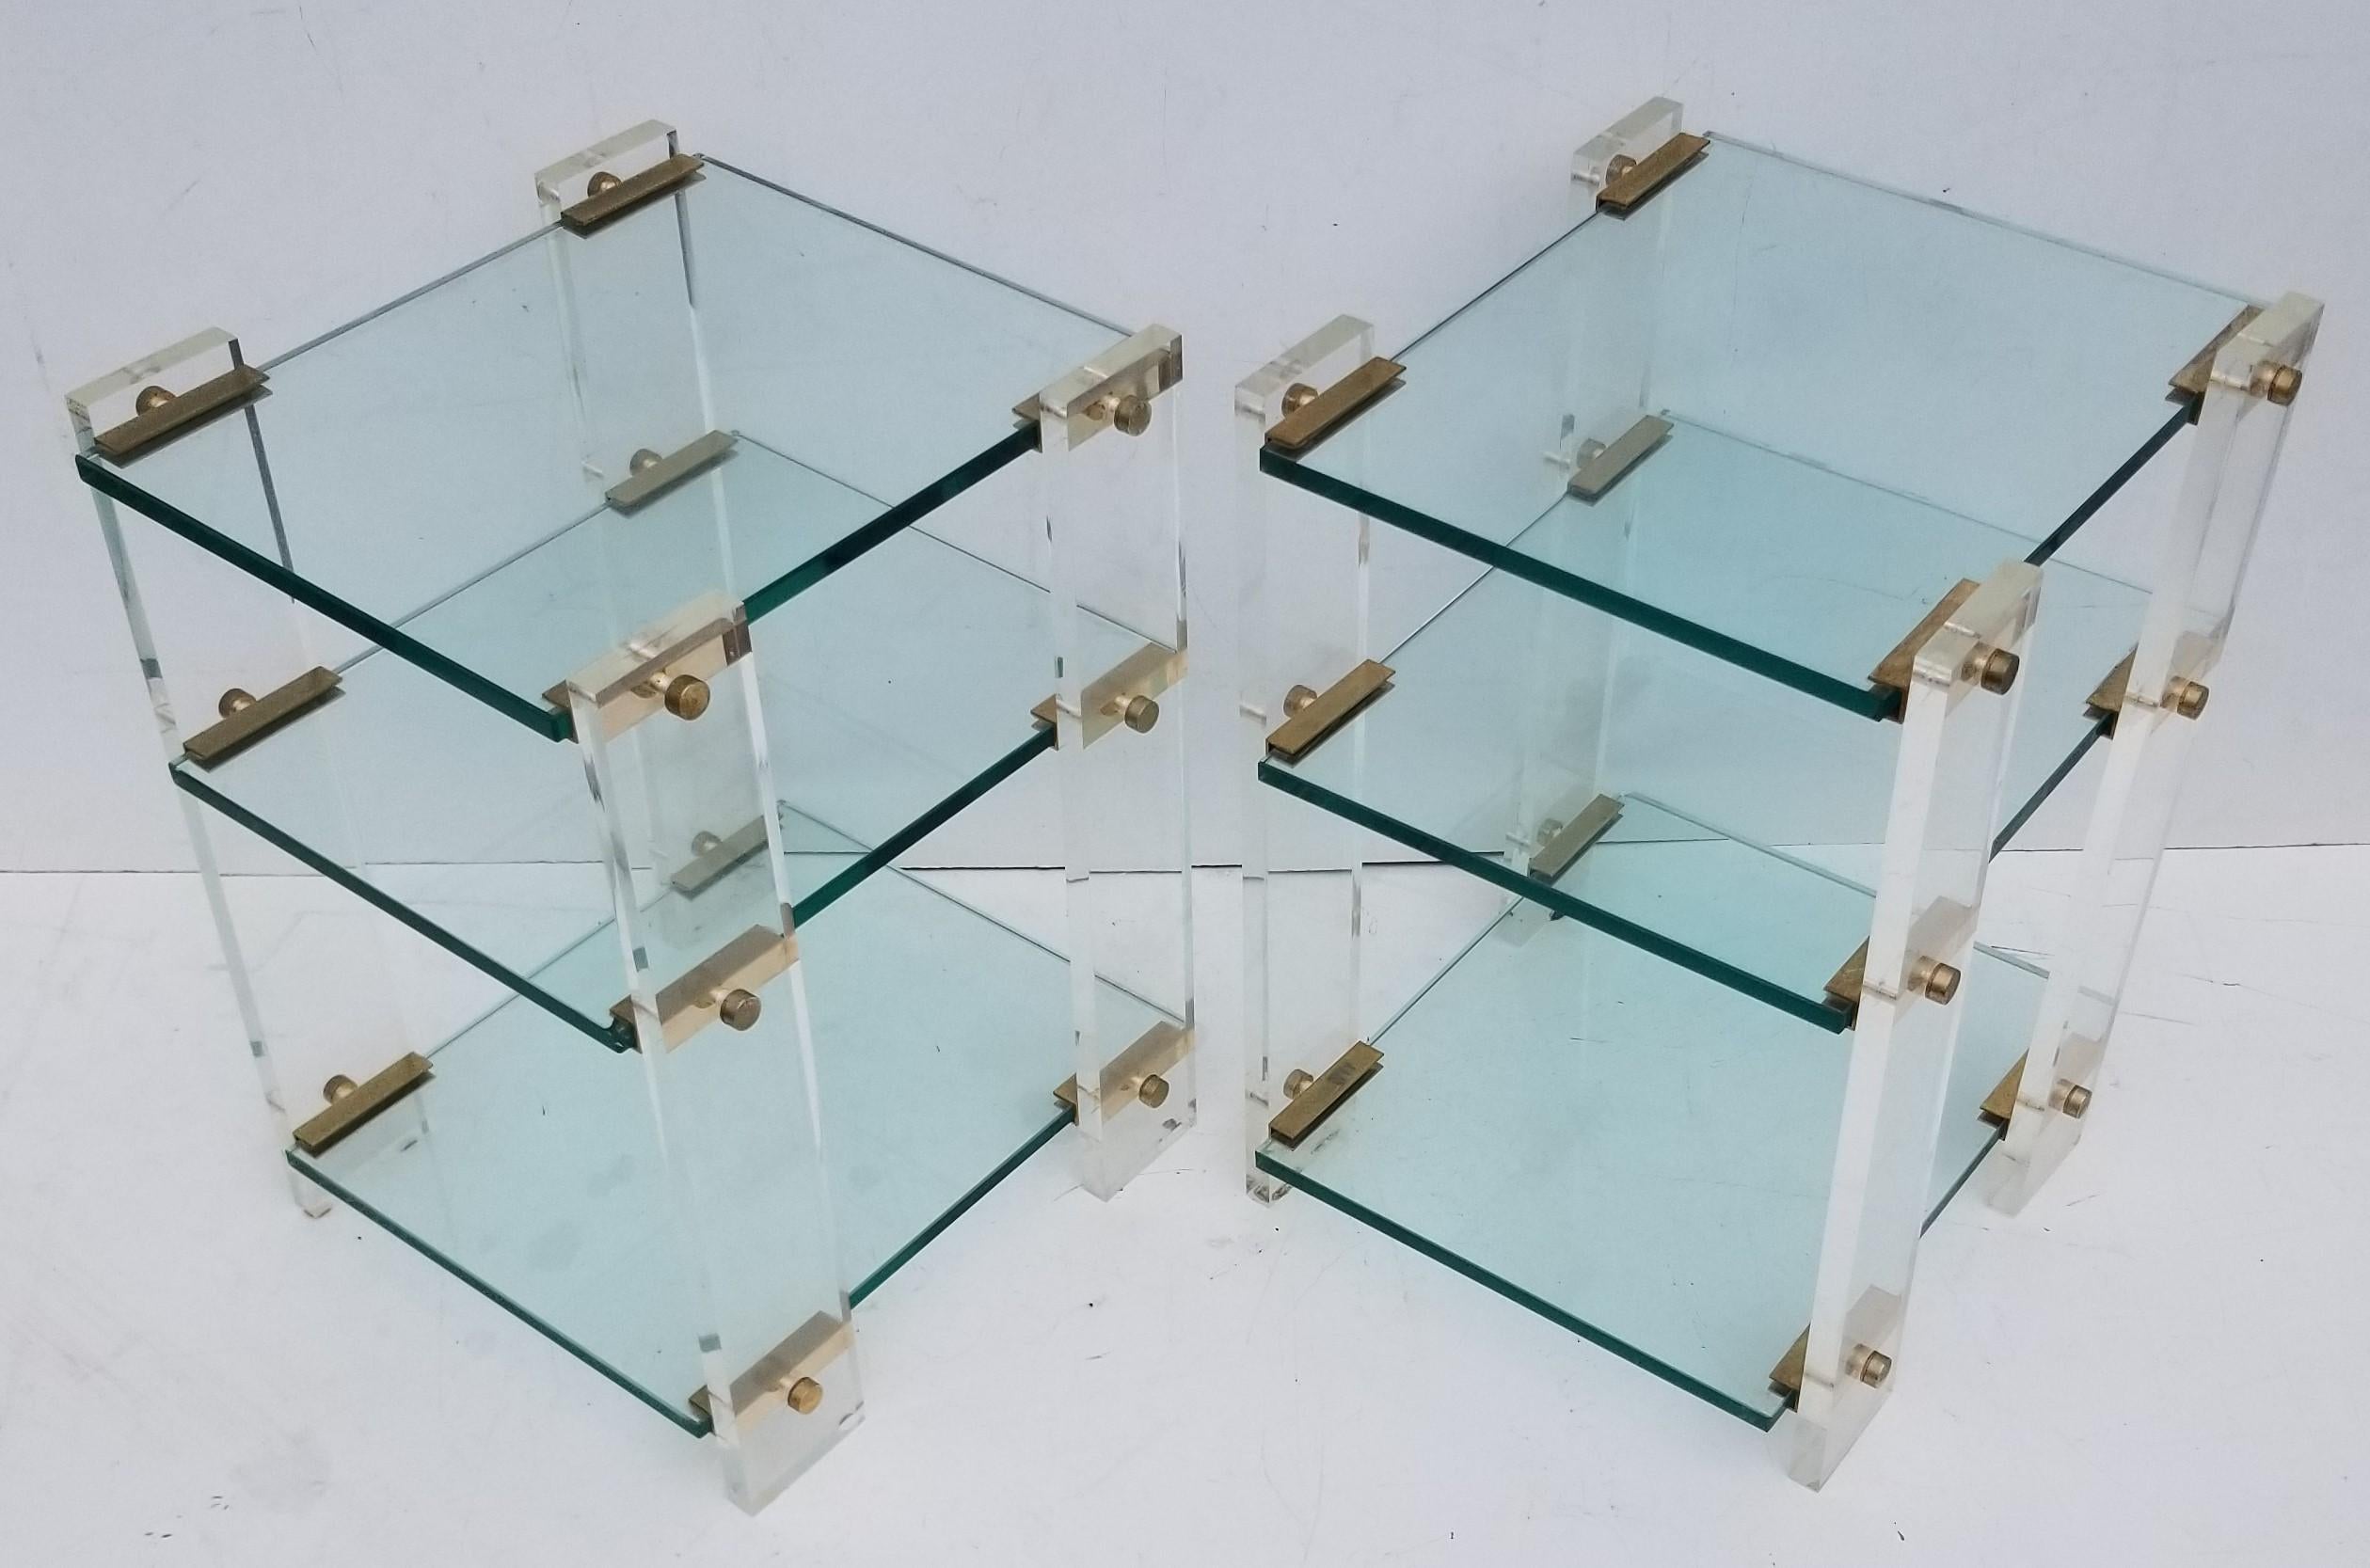 Pair of Maison Romeo side table, plexiglass and glass shelves
Heavy and sturdy, superb quality.

Space between the shelves: 8 in.